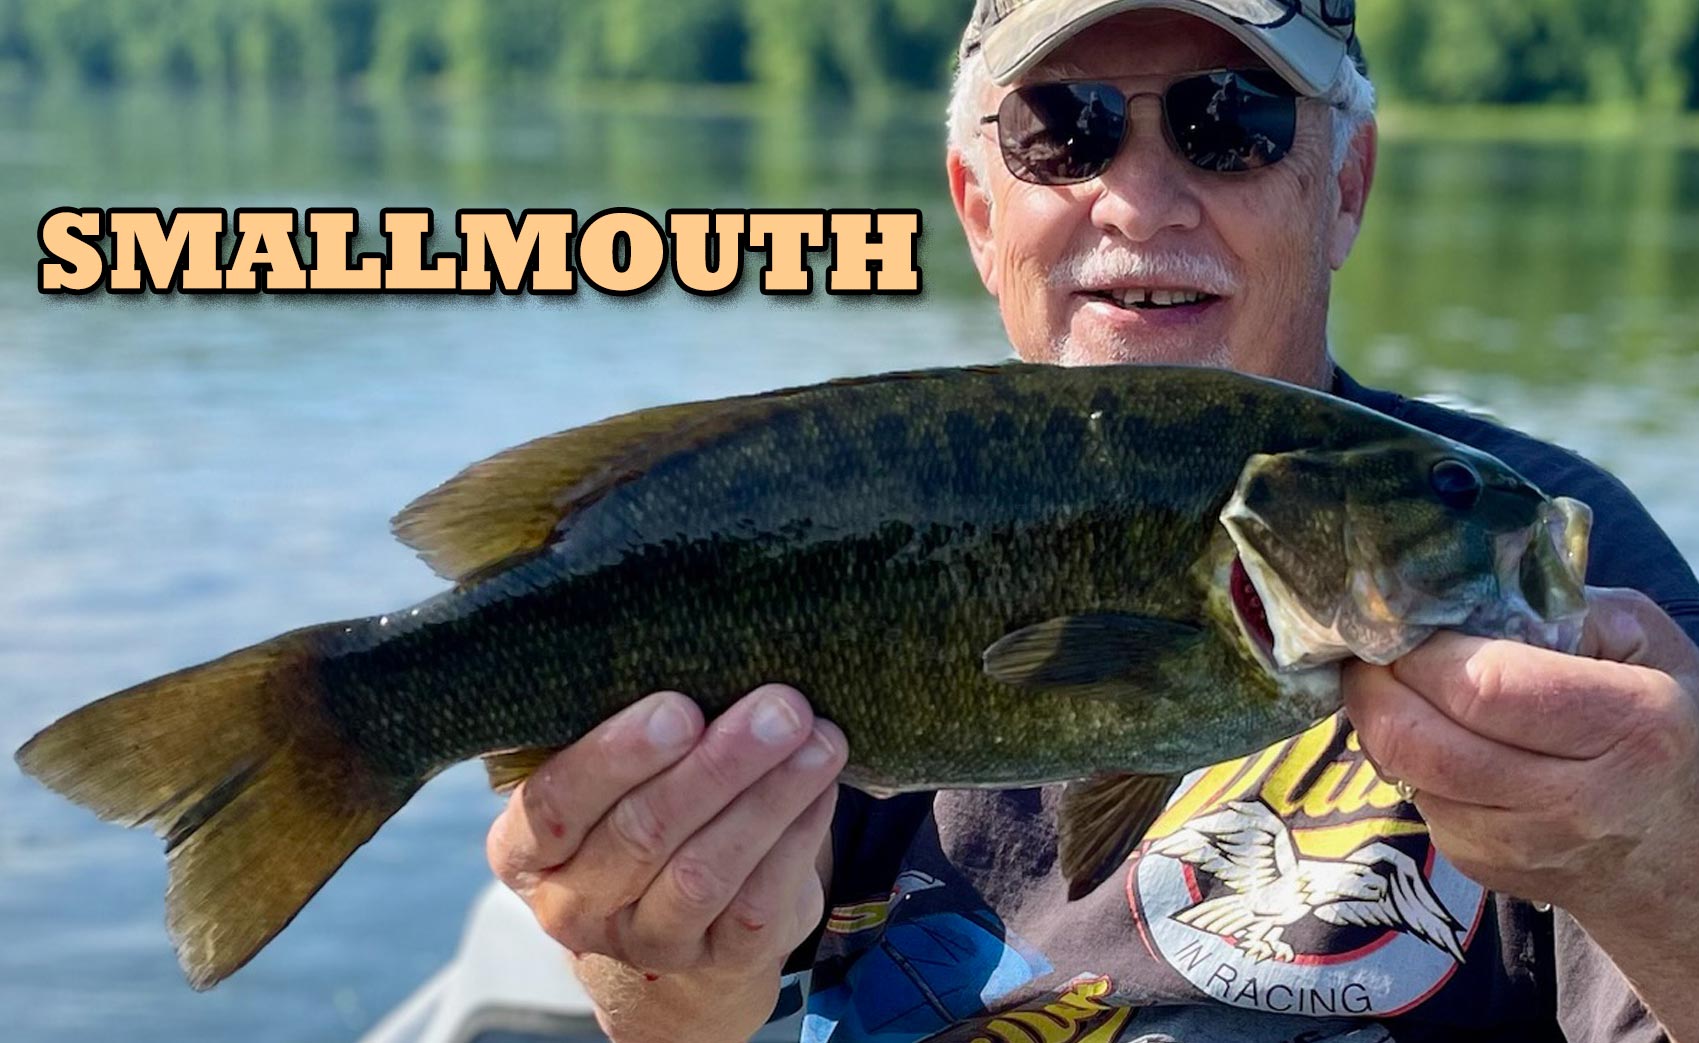 We Offer Drift Boat Trips On The Juniata River and Susquehanna River For Large Smallmouth. 